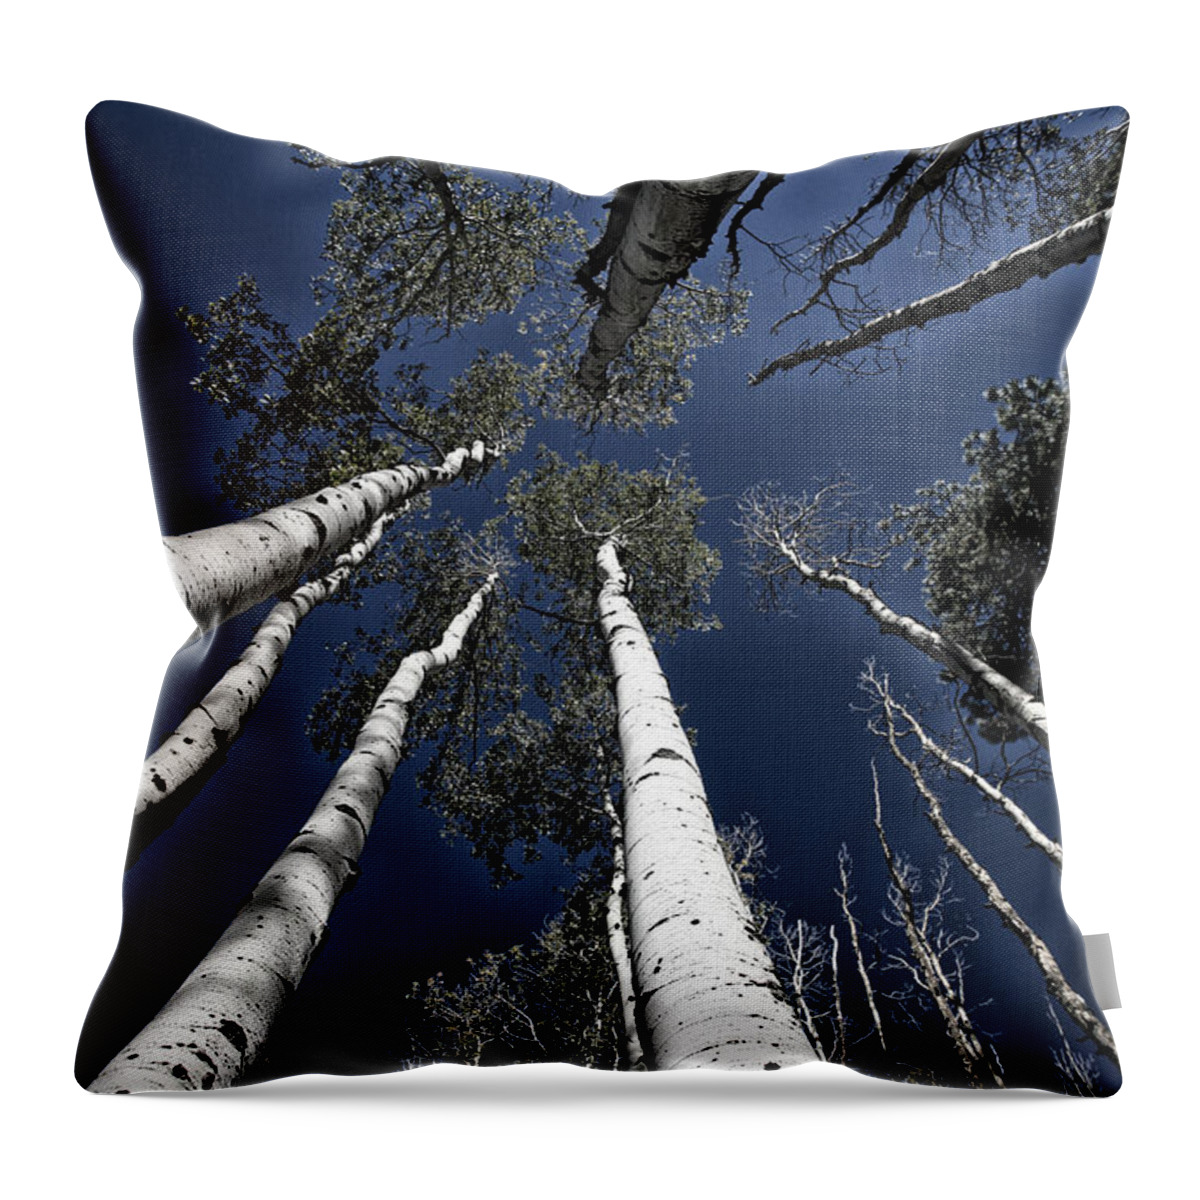 Skyward Throw Pillow featuring the photograph Towering Aspens #2 by Timothy Johnson